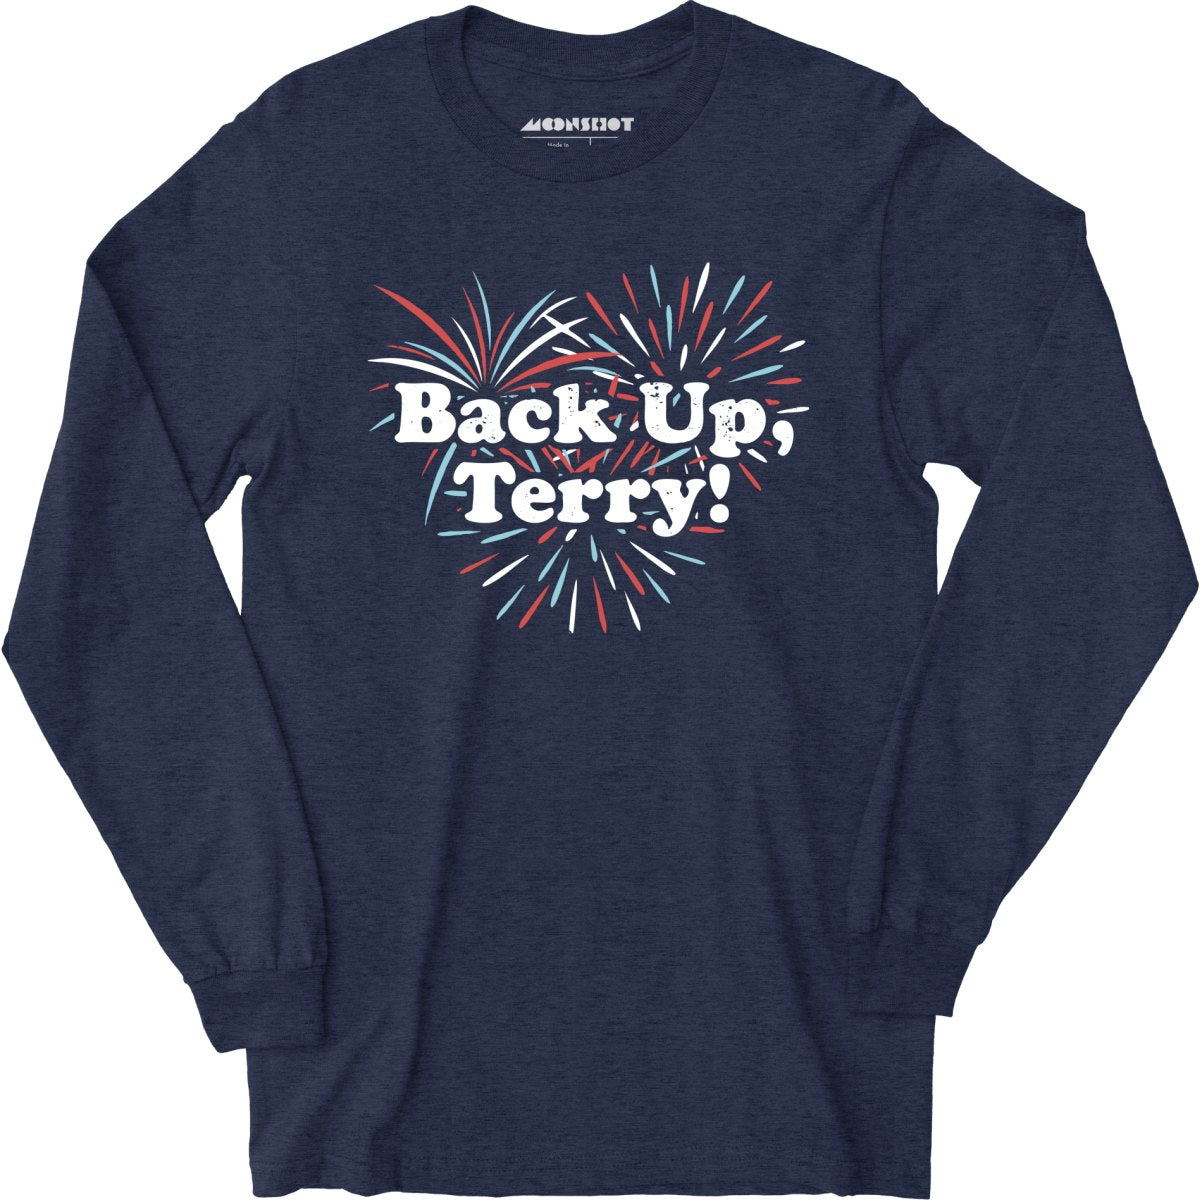 Back Up, Terry! - Long Sleeve T-Shirt